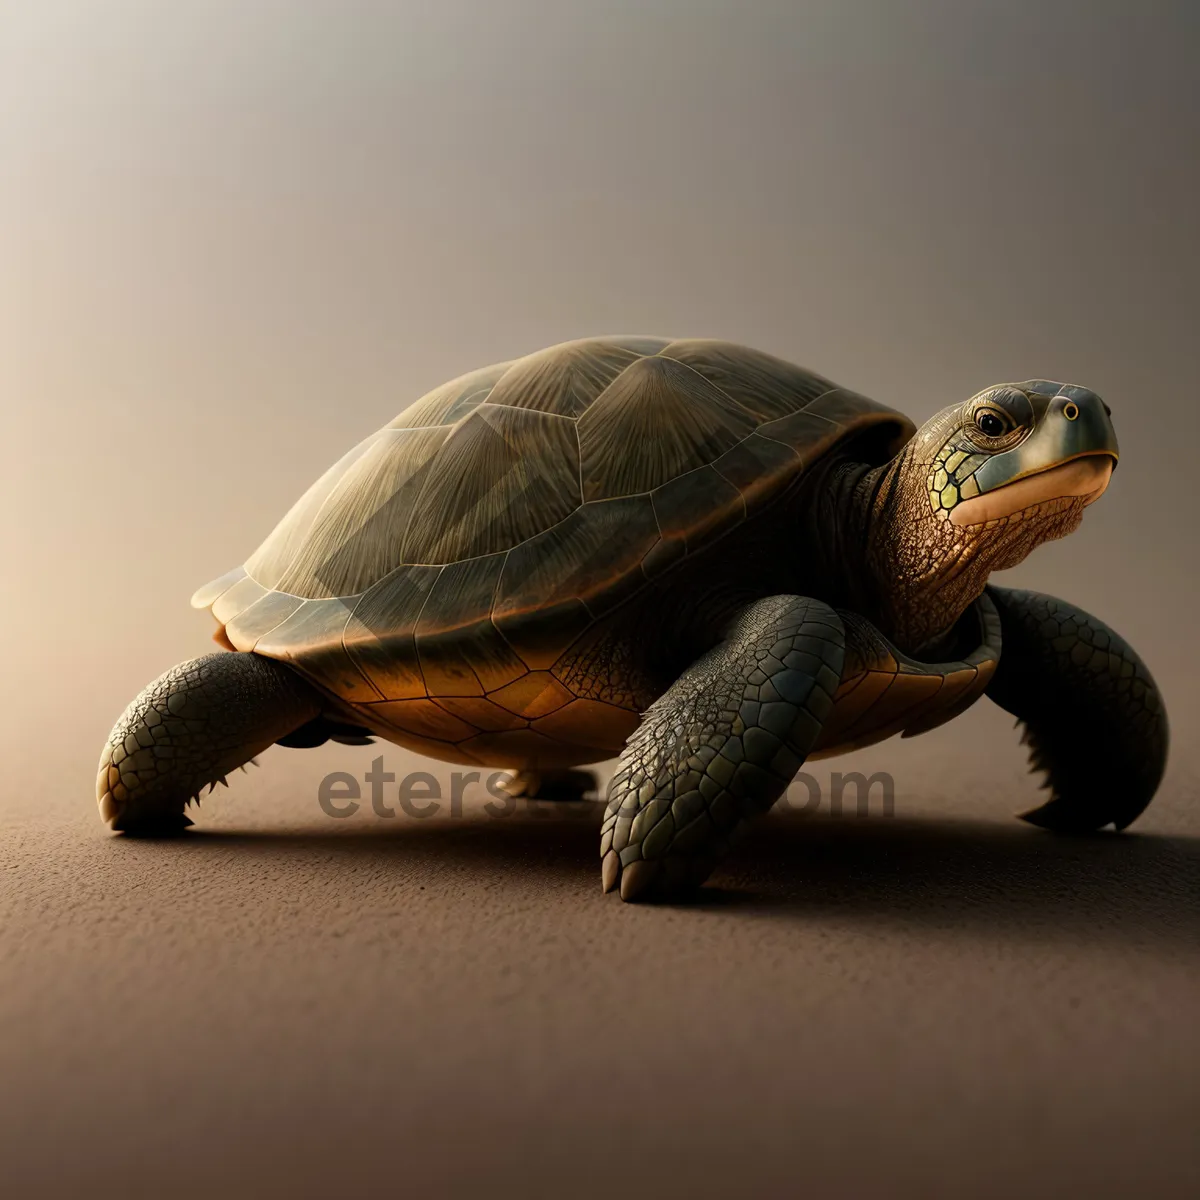 Picture of Terrapin Turtle: Slow-moving, Cute Aquatic Creature with Hard Shell